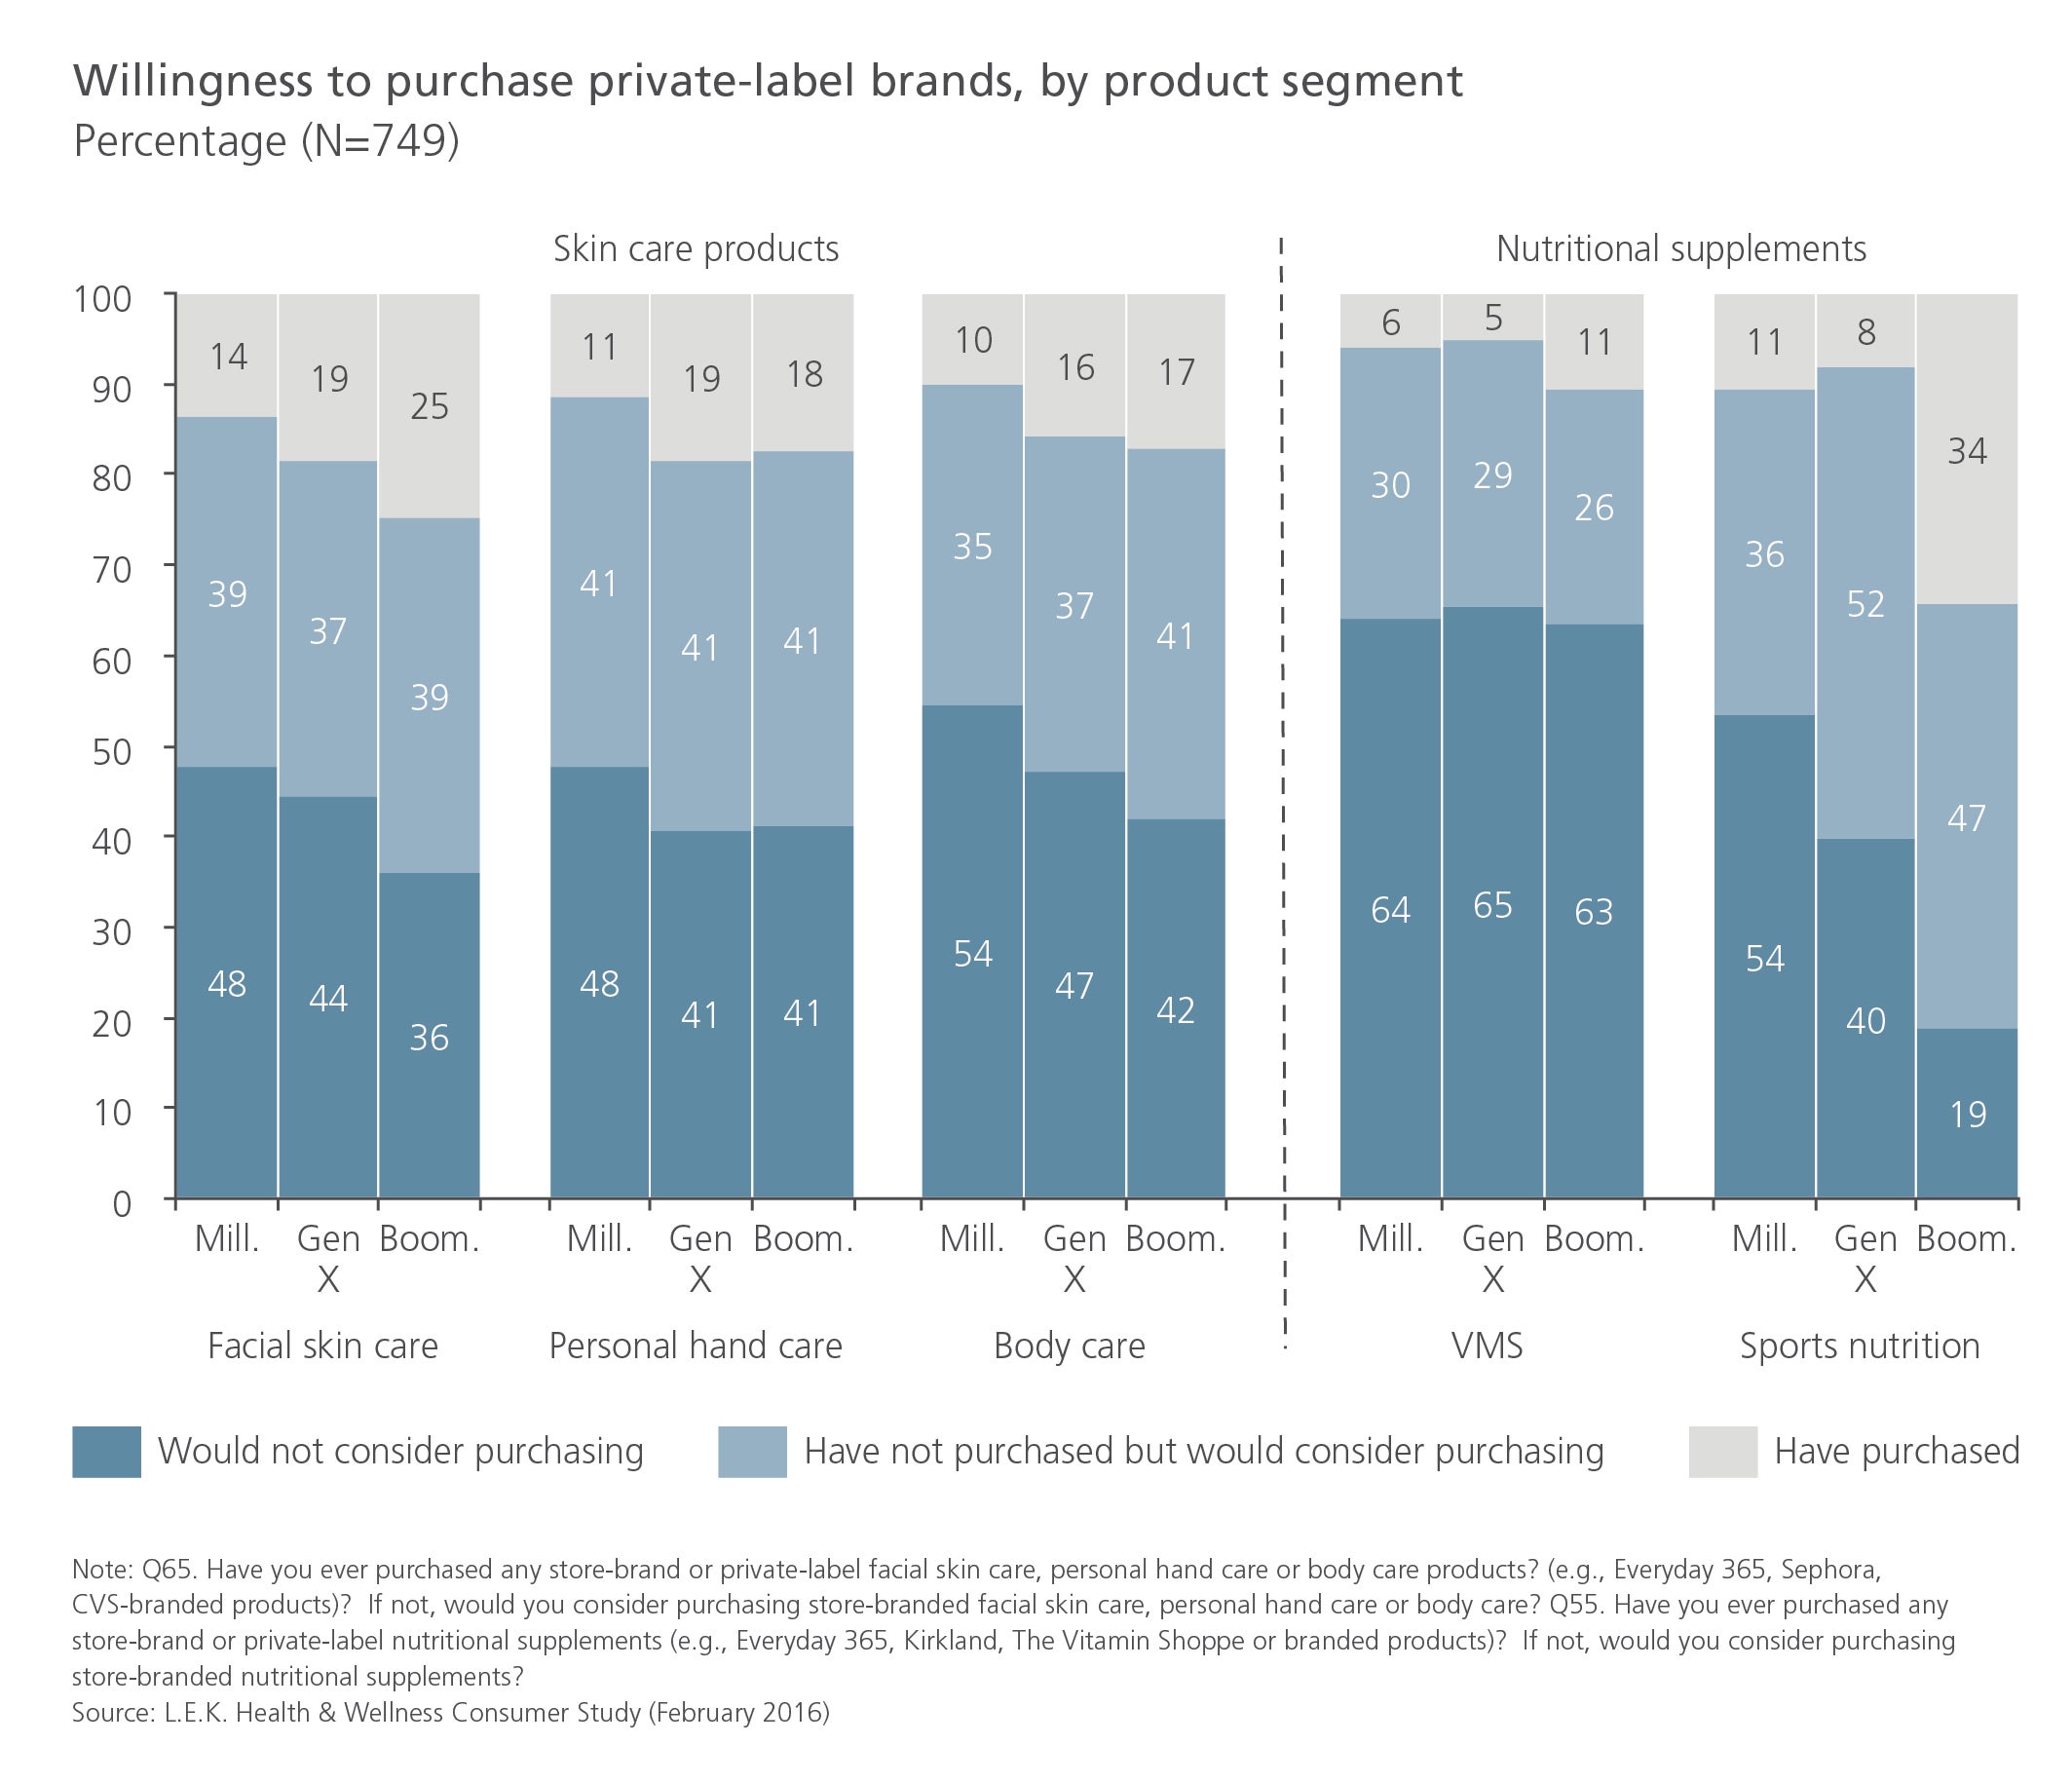 Willingness to purchase private-label brands, by product segment